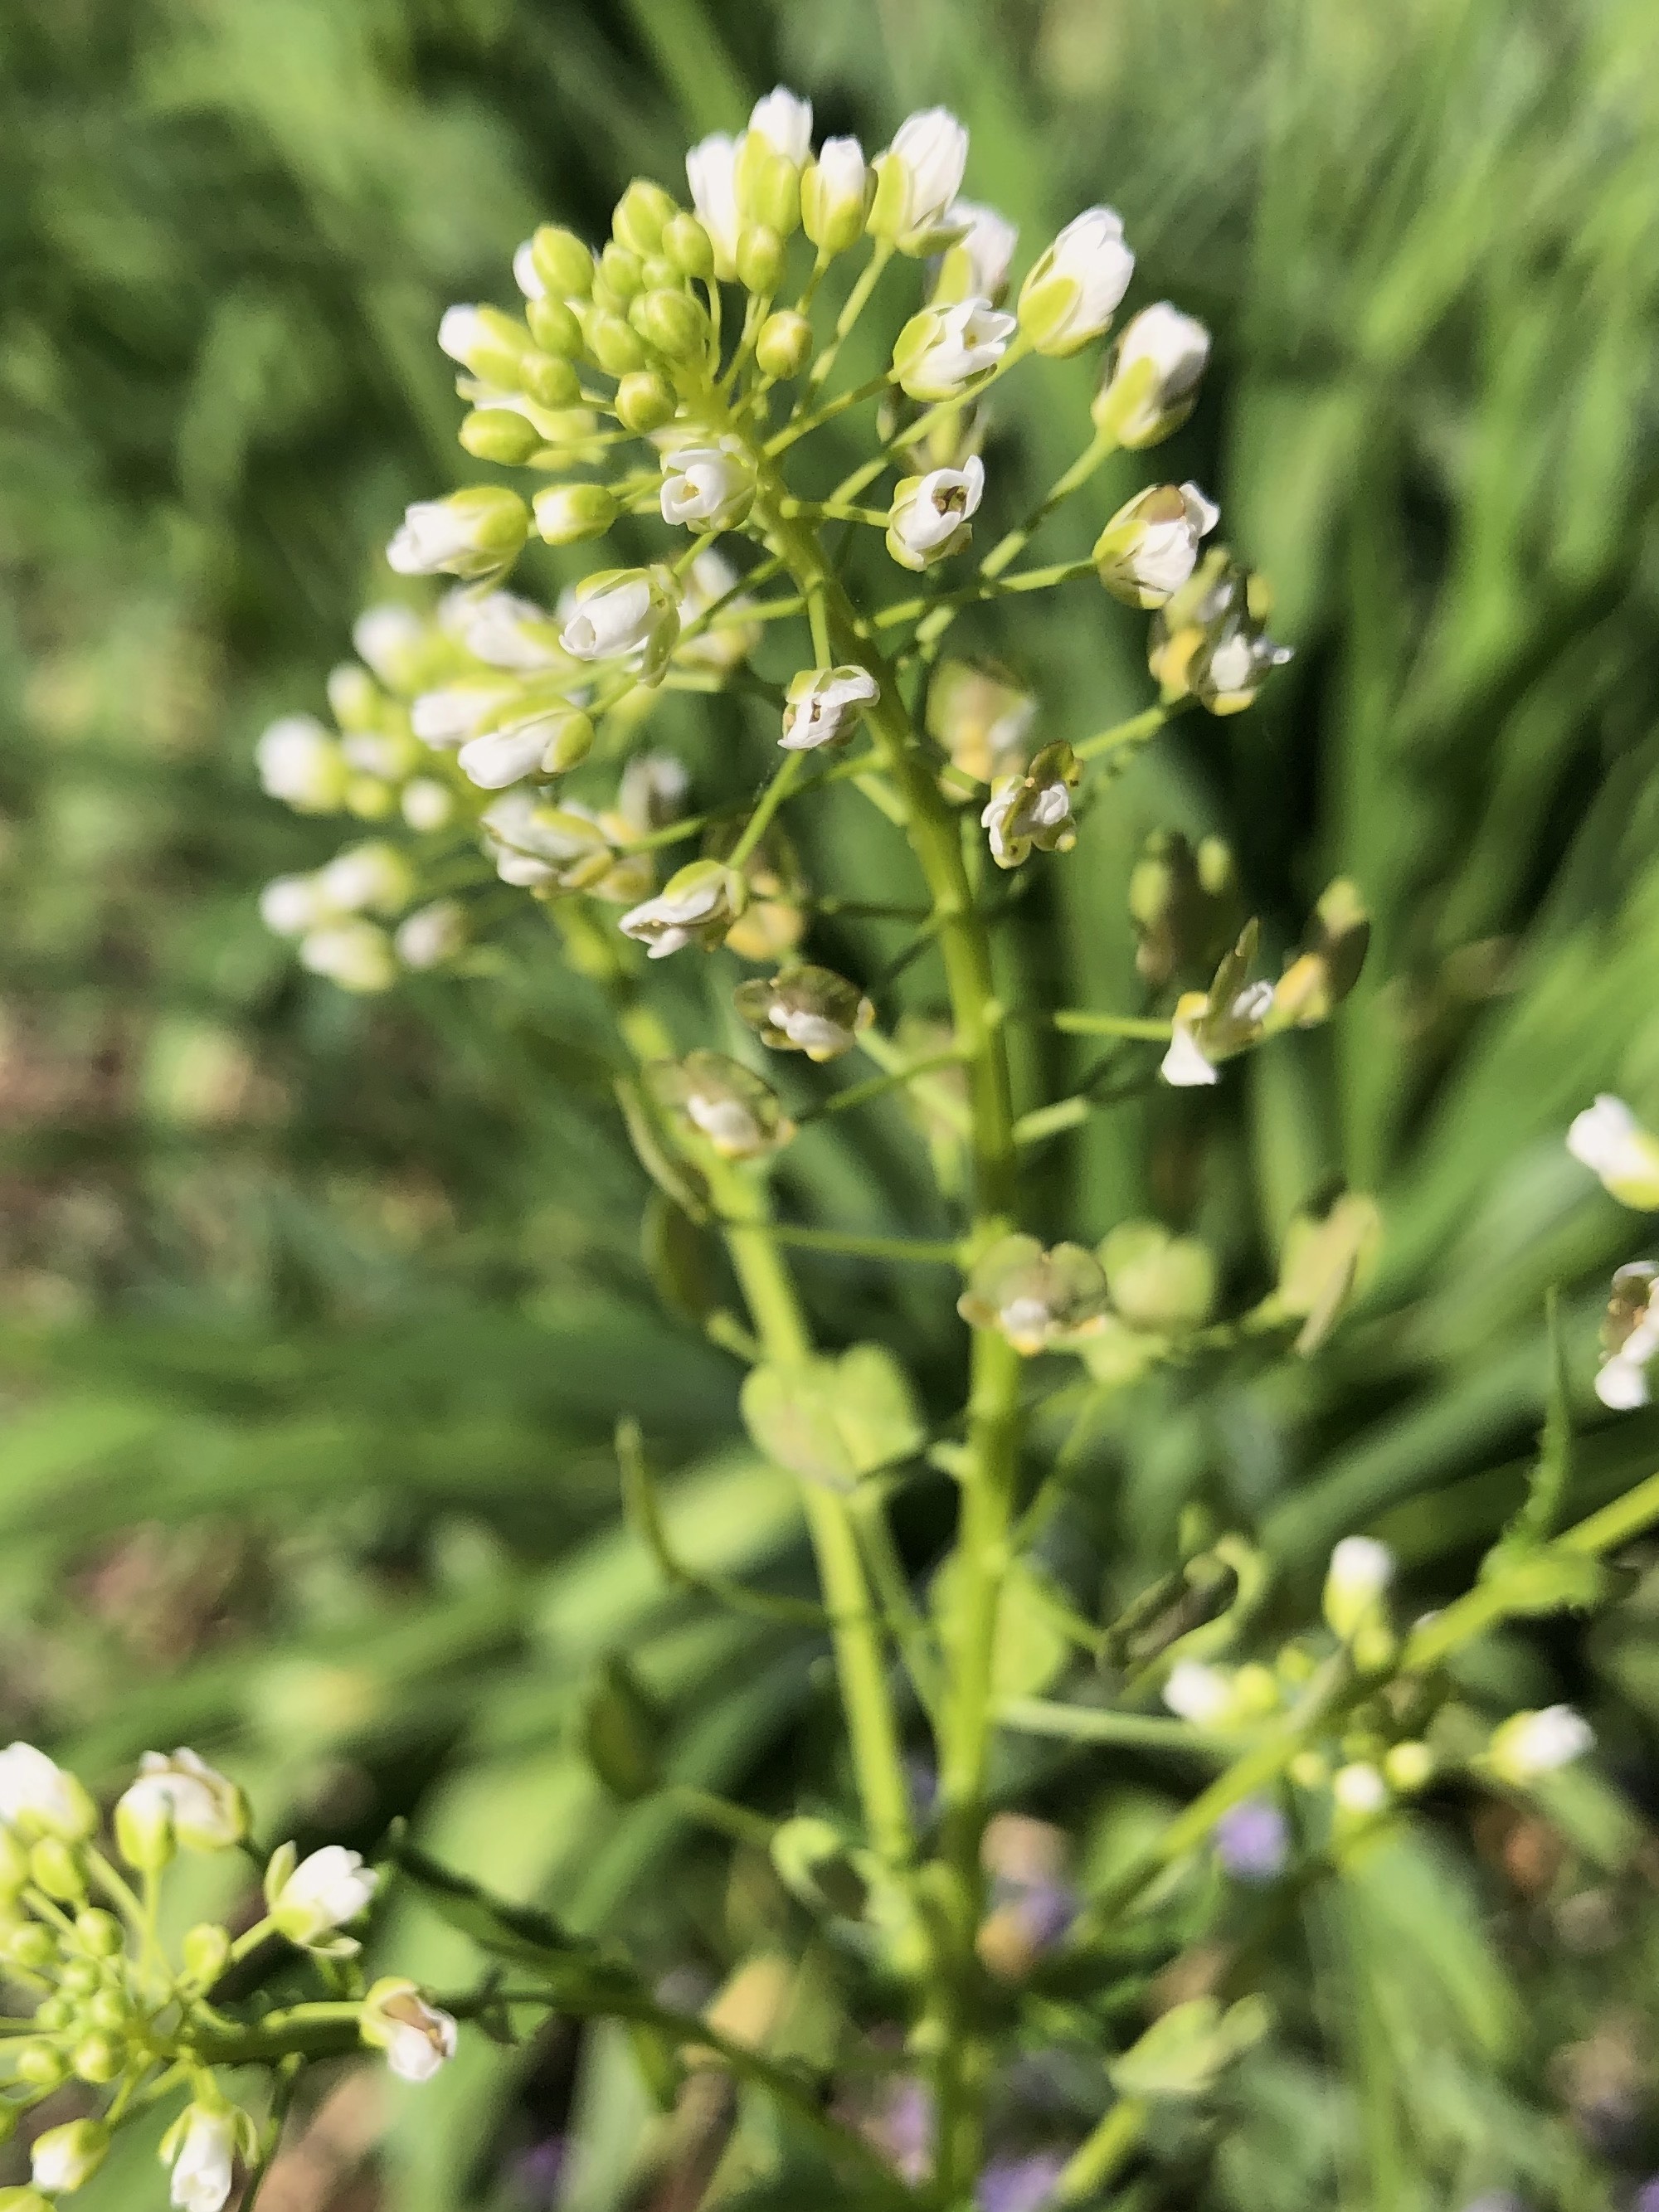 Field Pennycress near retaining pond on corner of Manitou Way and Nakoma Road in Madison, Wisconsin on May 5, 2021.